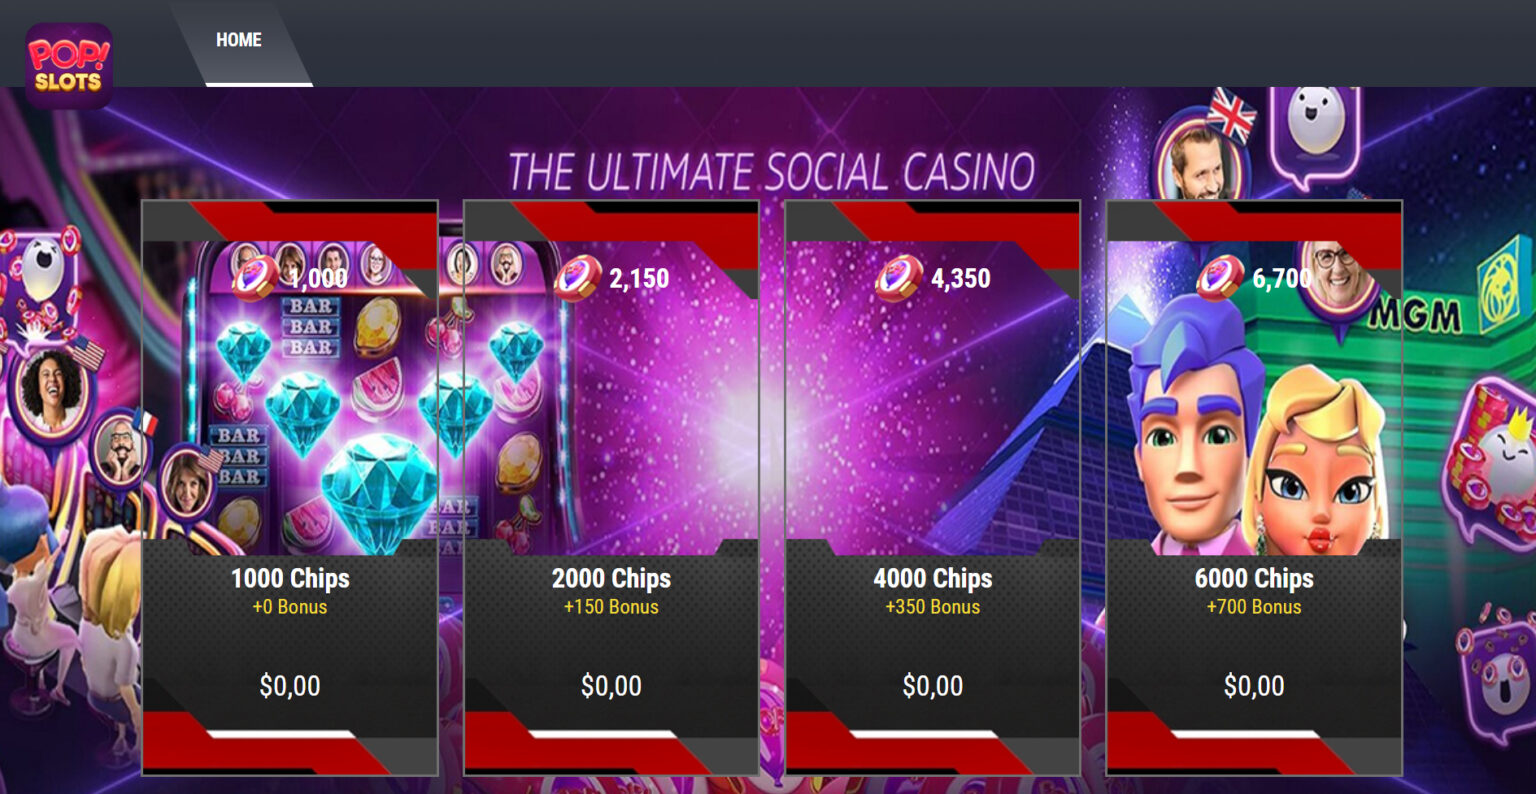 pops slots free chips 10122019